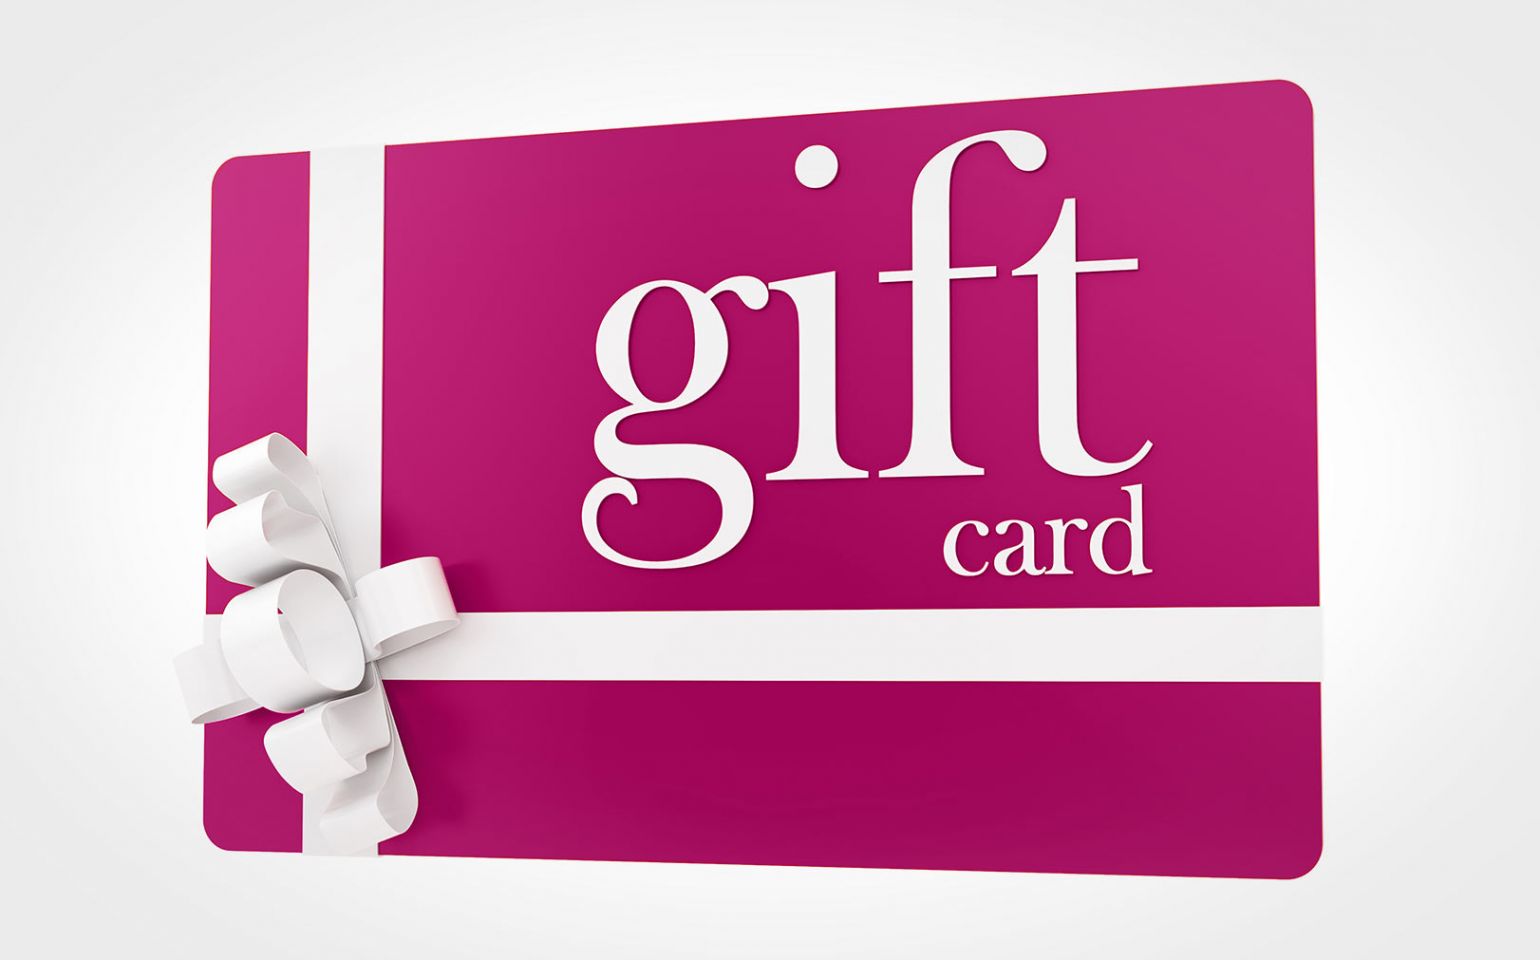 Gift cards make great gifts for birthdays, seasonal holidays, or any occasi...